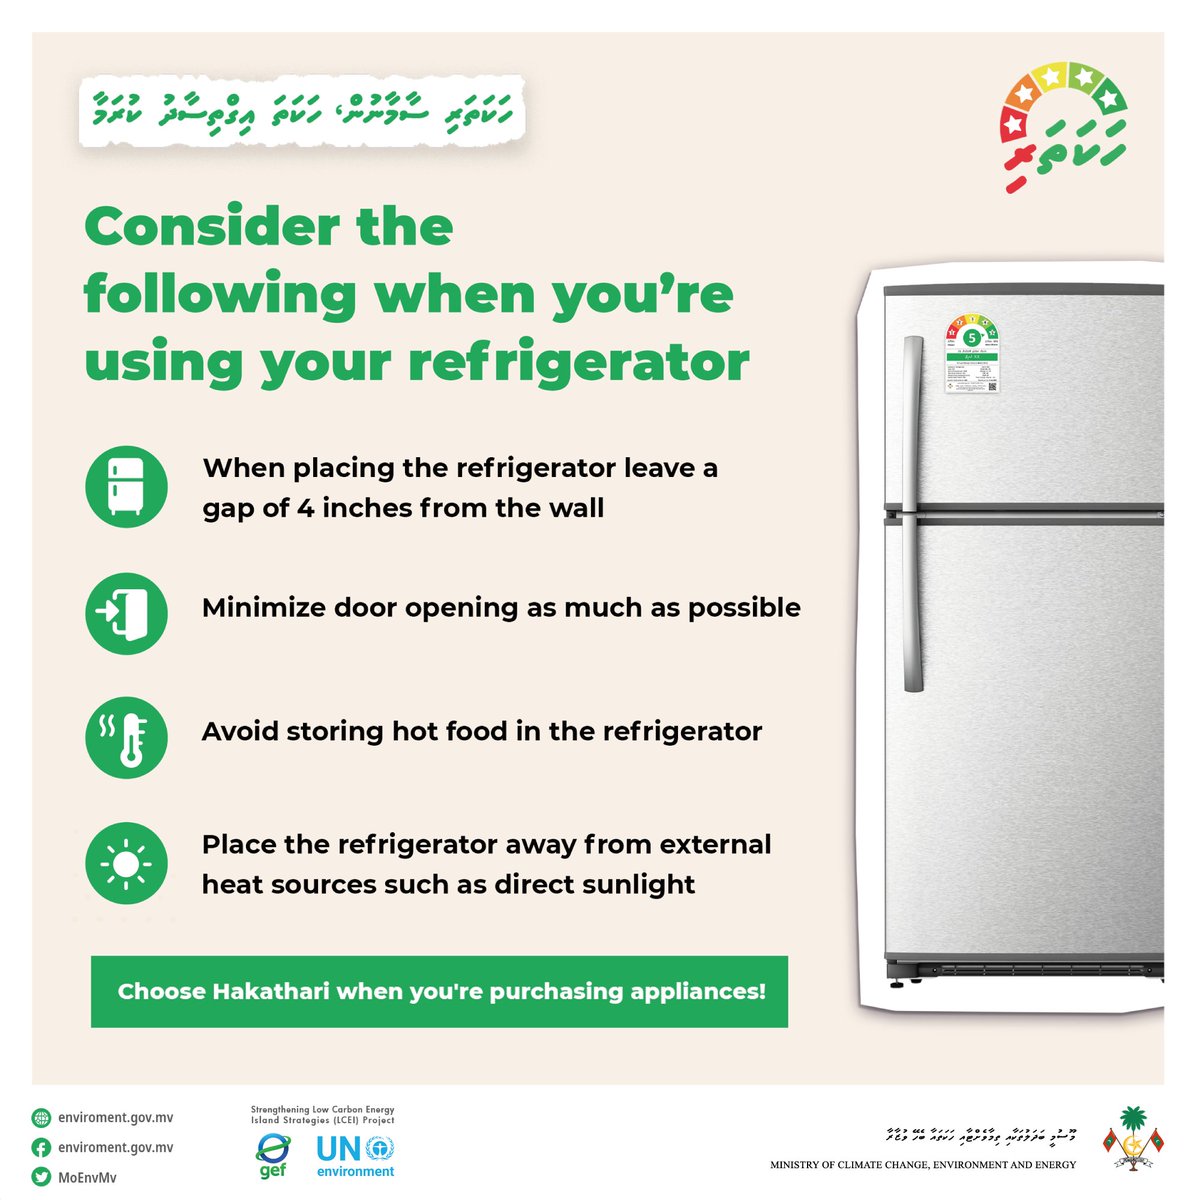 Pay attention to these details when using refrigerator at home! For more information on Hakathari labeled refrigerator: environment.gov.mv/v2/en/hakathar… #hakathari #hakathasamakaara